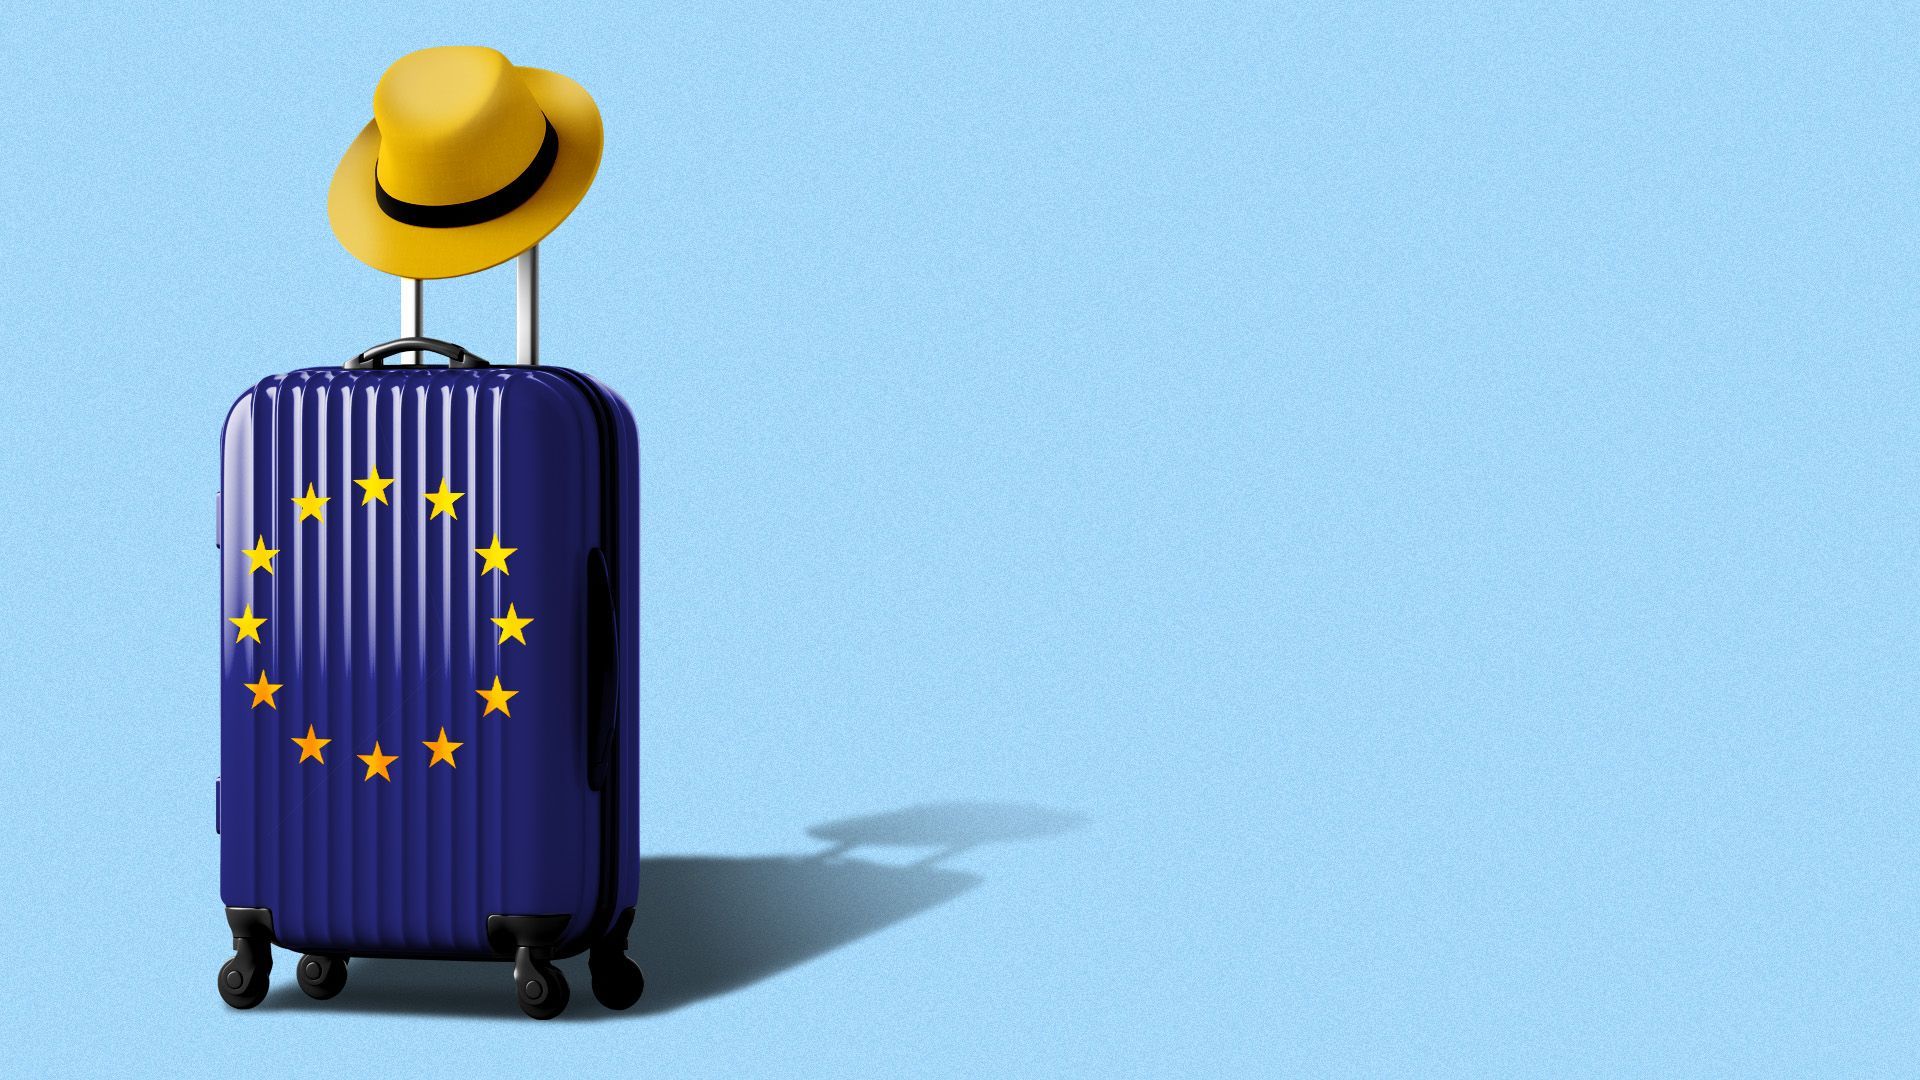 Illustration of a suitcase with the EU flag on it